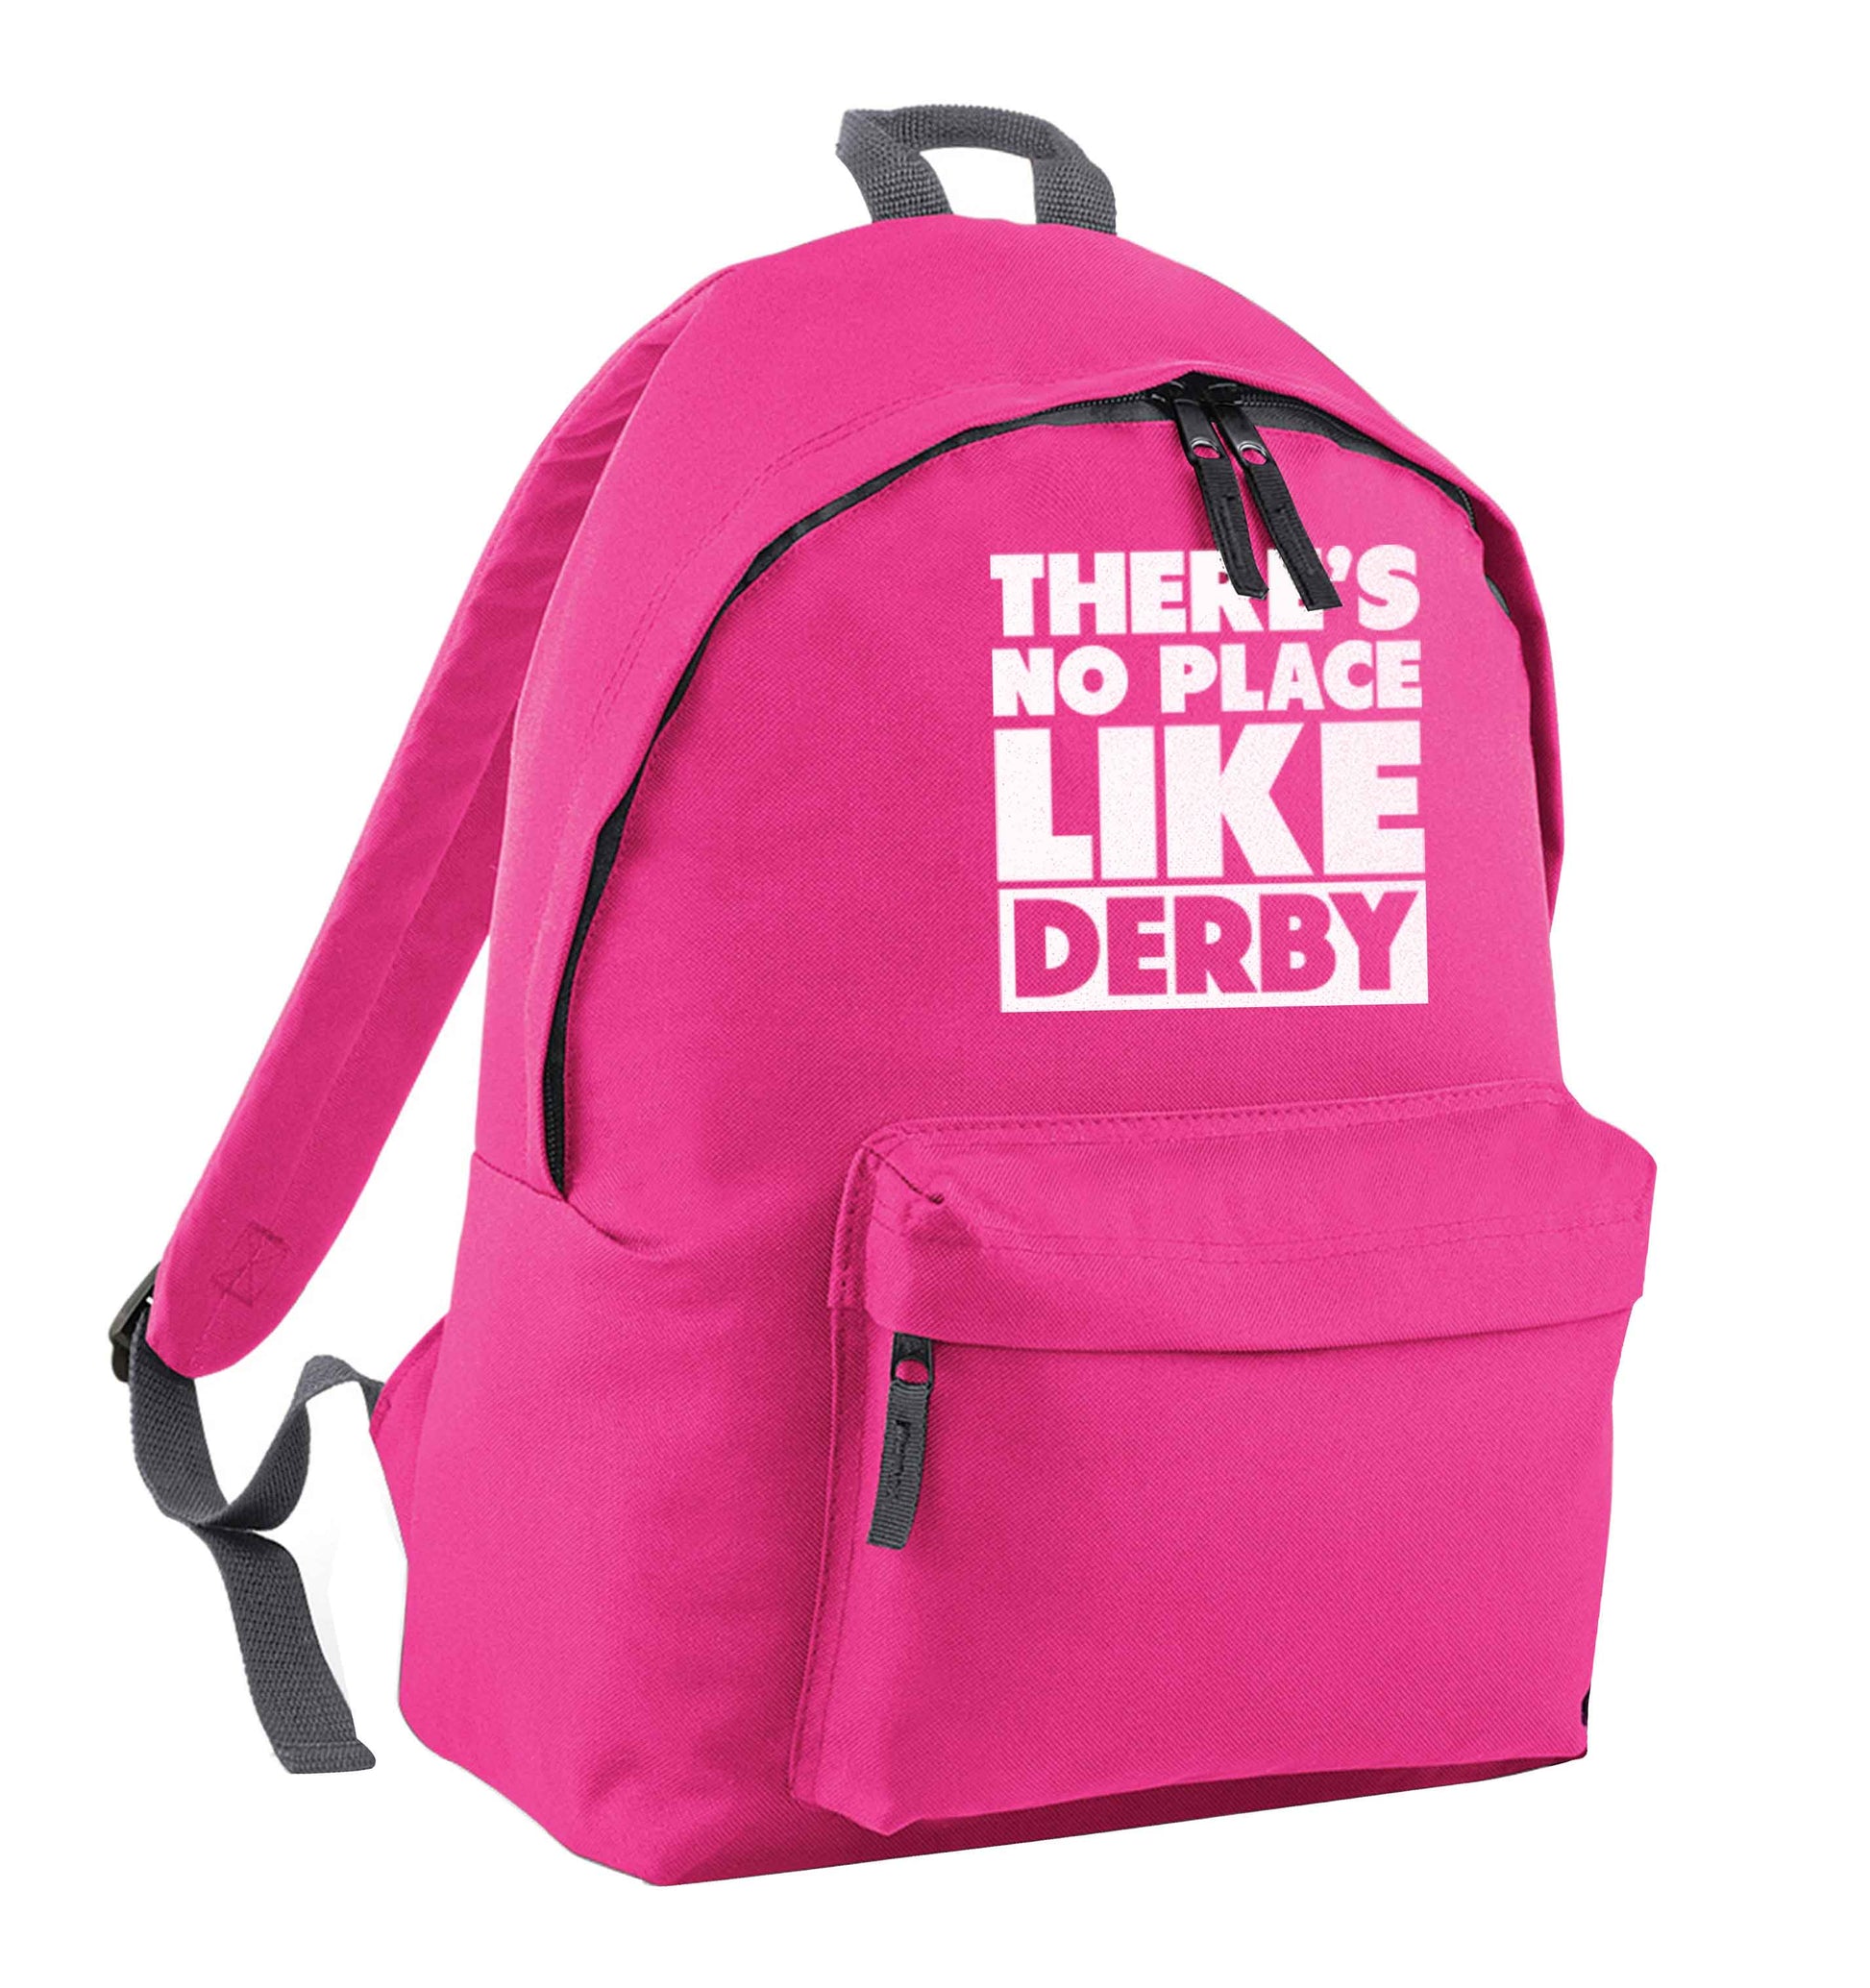 There's no place like Derby pink adults backpack